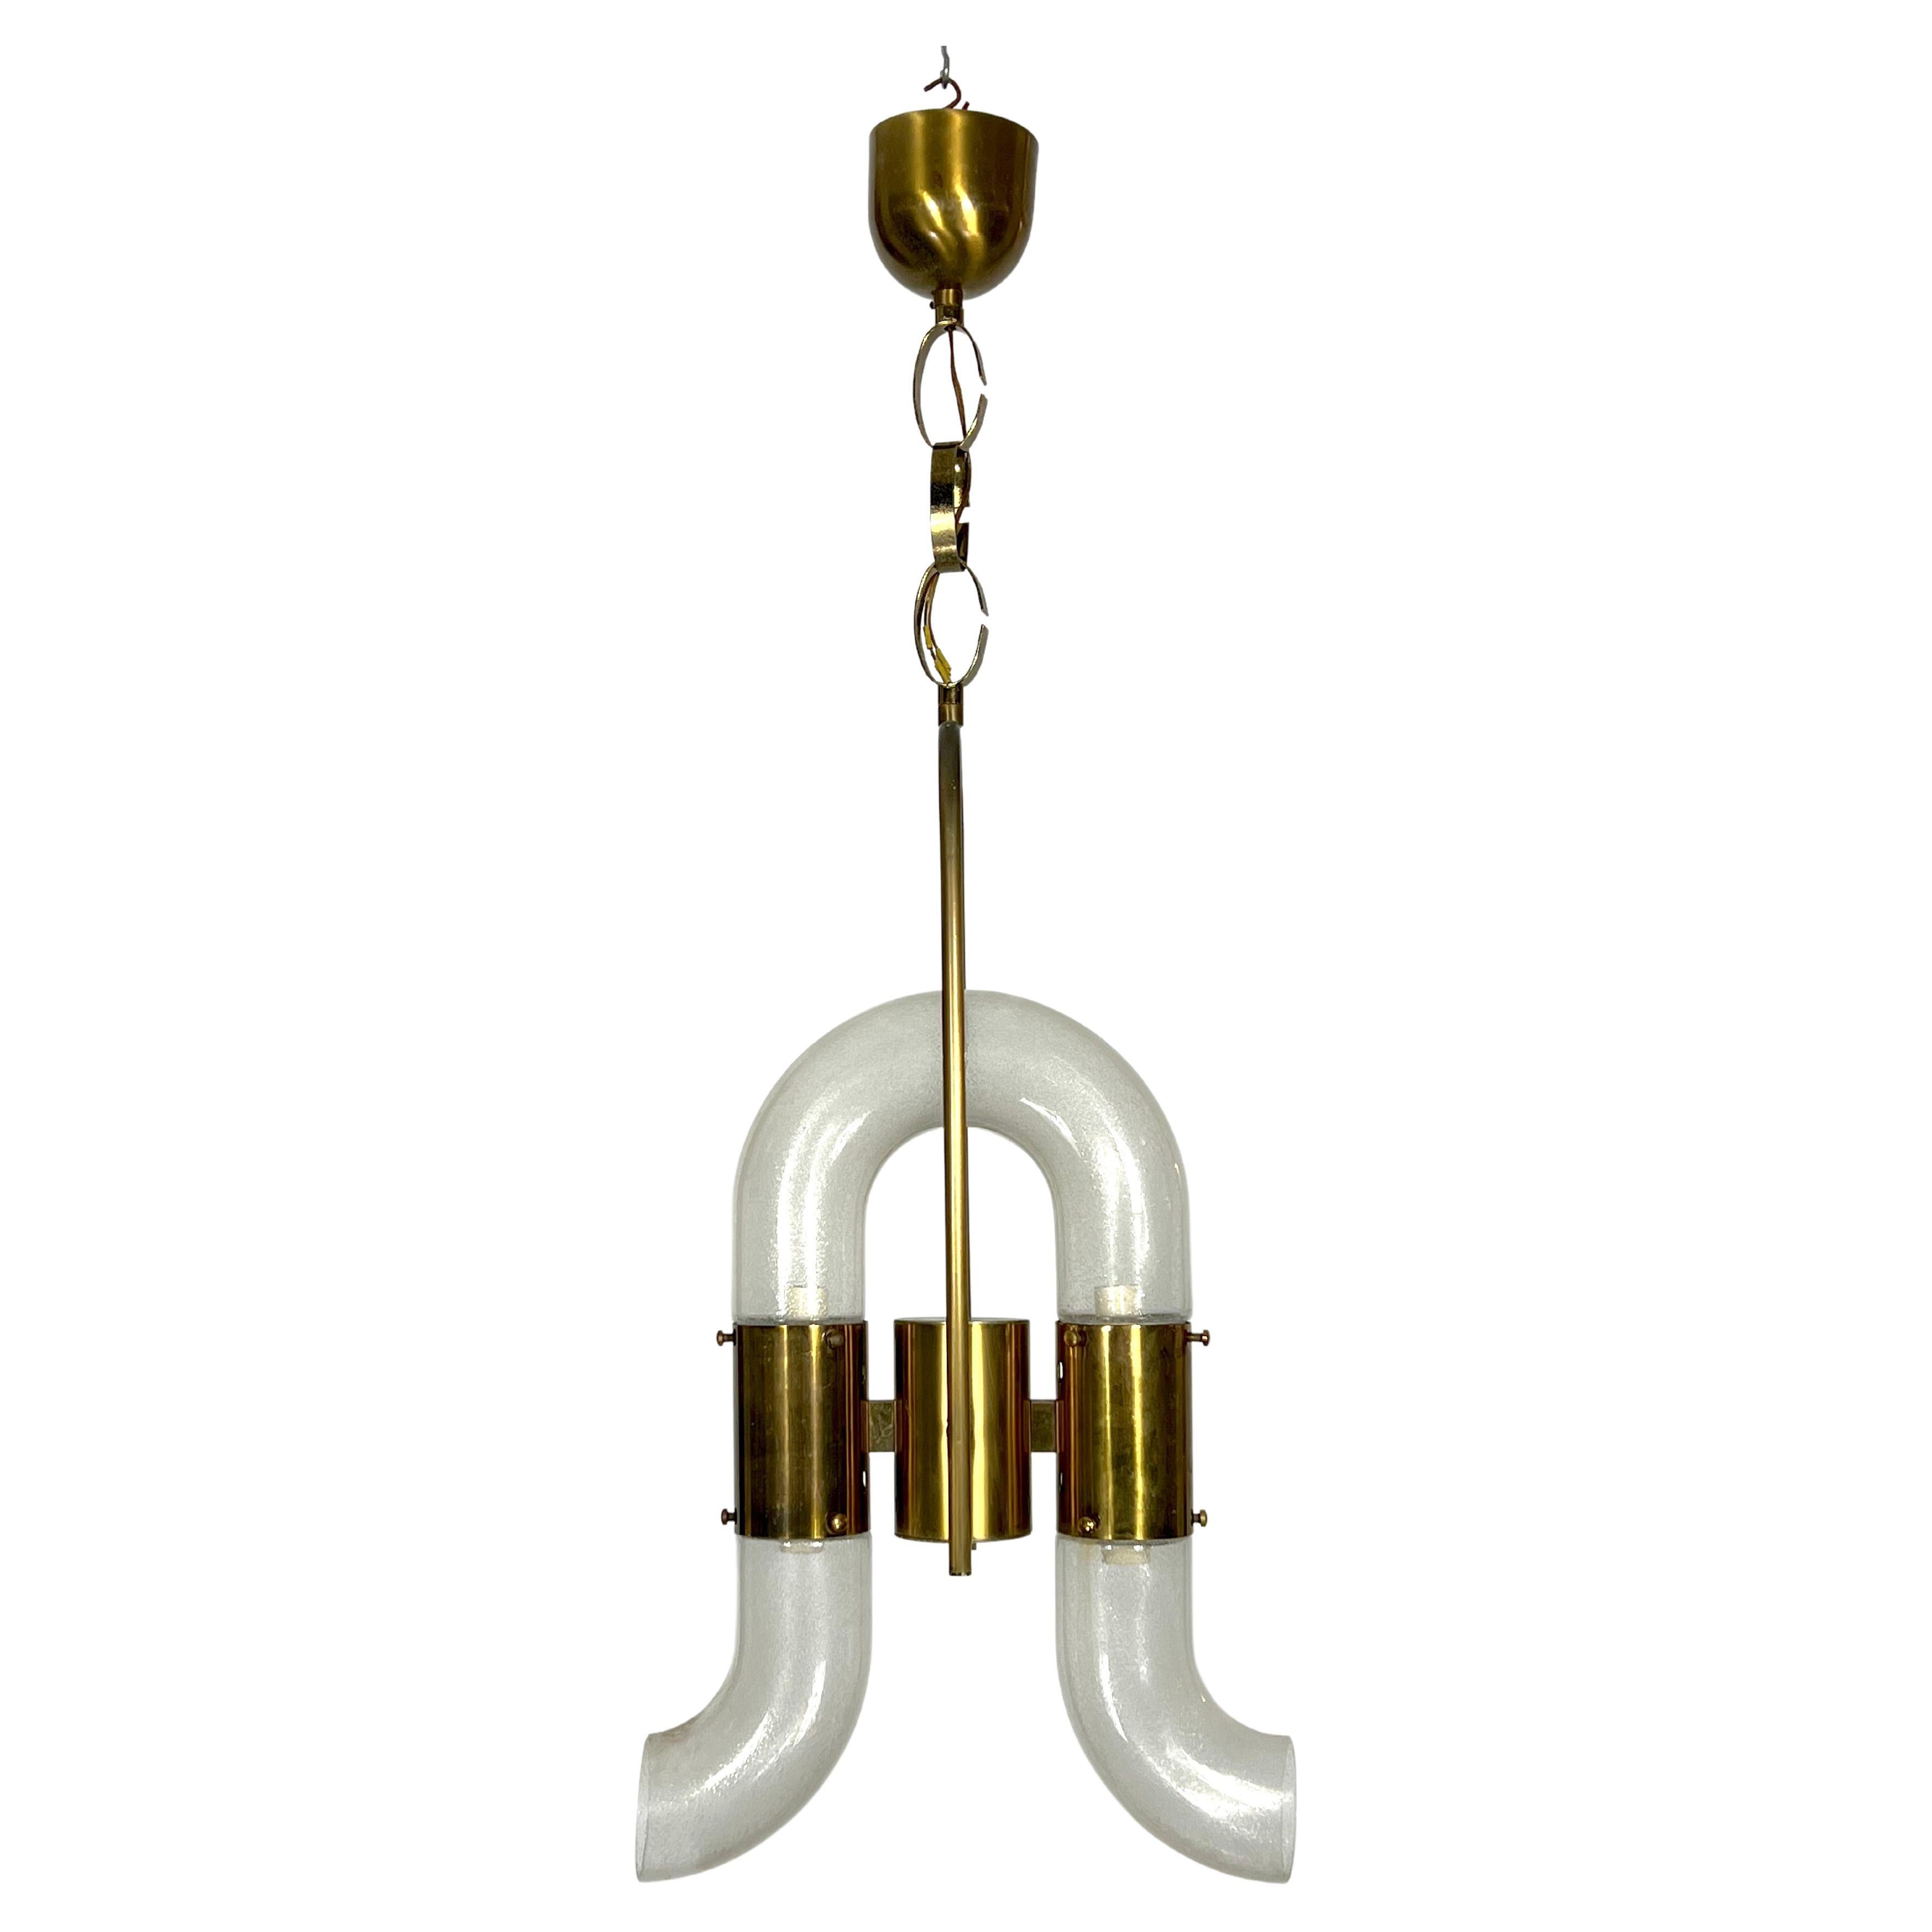 Carlo Nason for Mazzega, Brass and Pulegoso Glass Chandelier from 70s For Sale